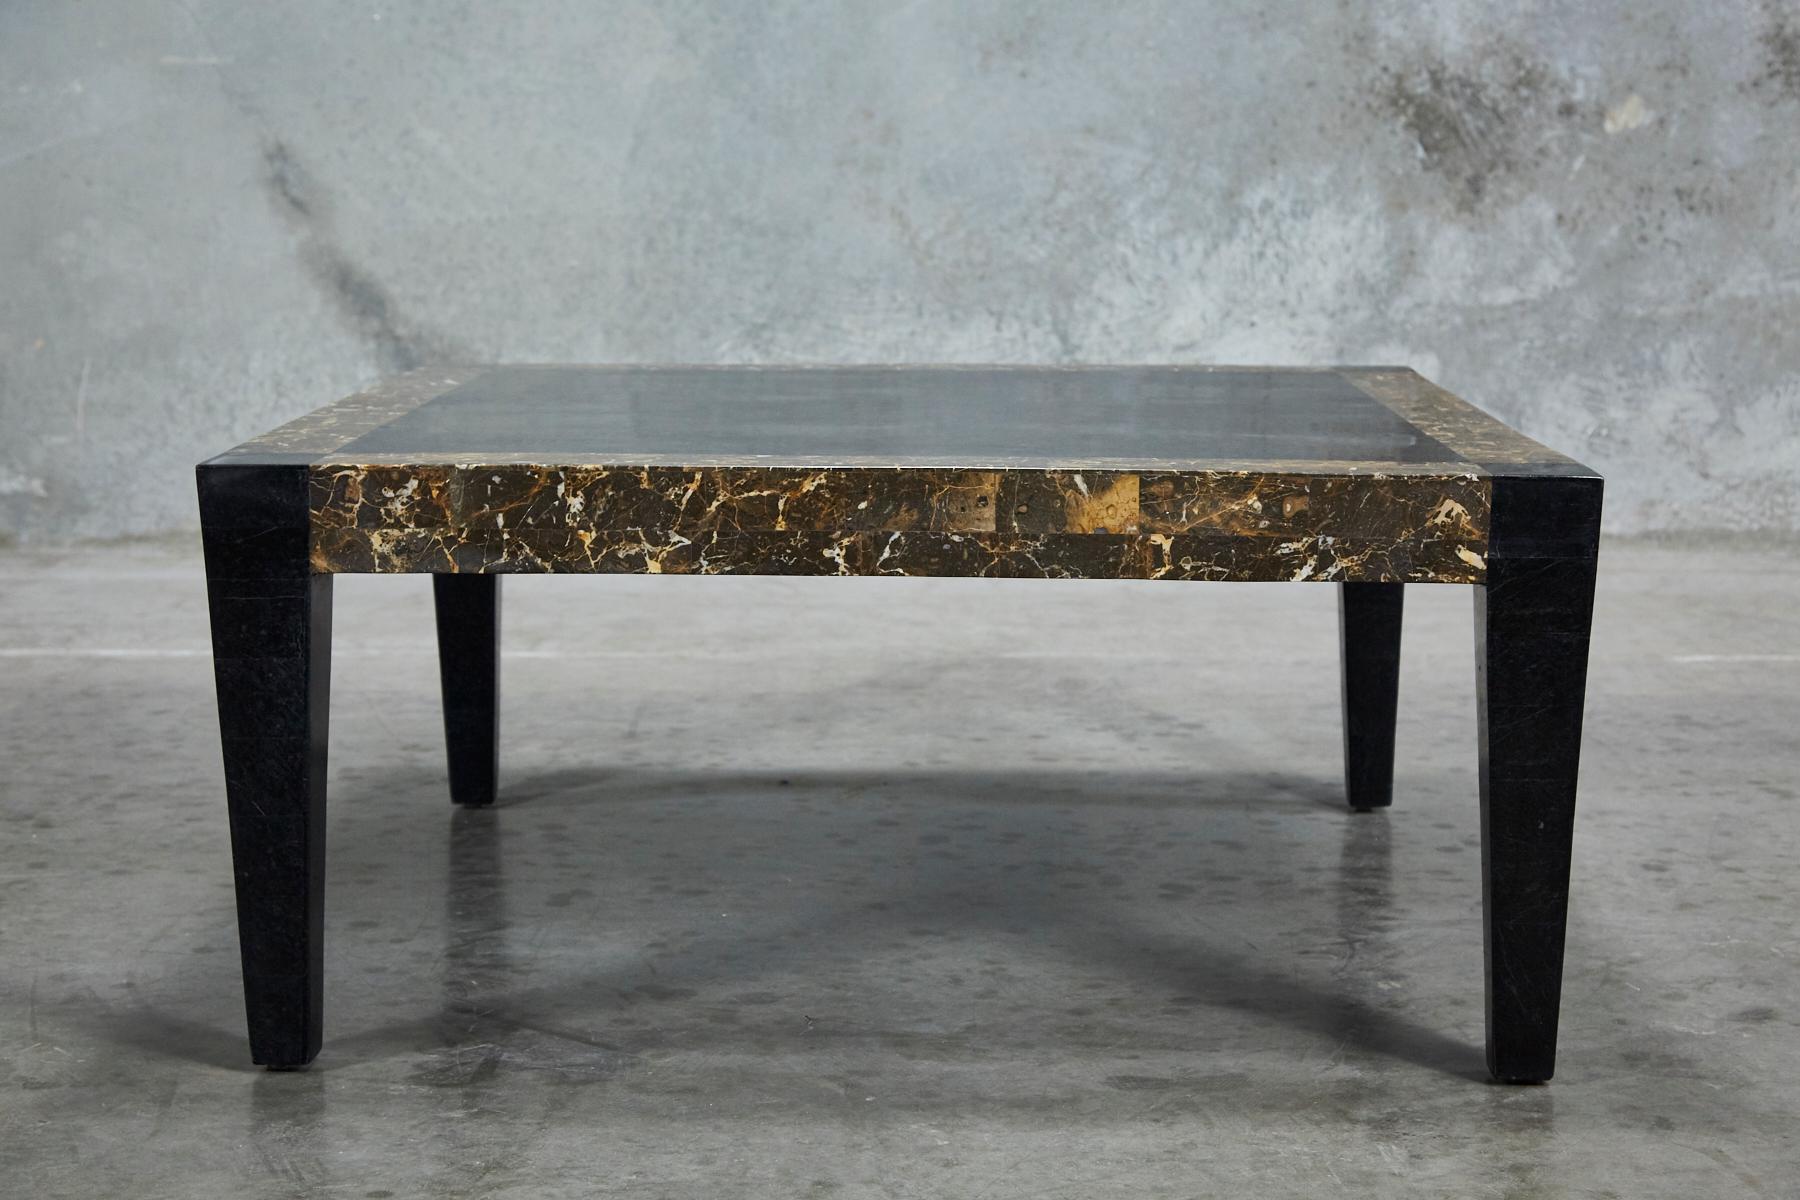 Postmodern Dual Color Tessellated Stone Cube Square Coffee Table, 1990s For Sale 4